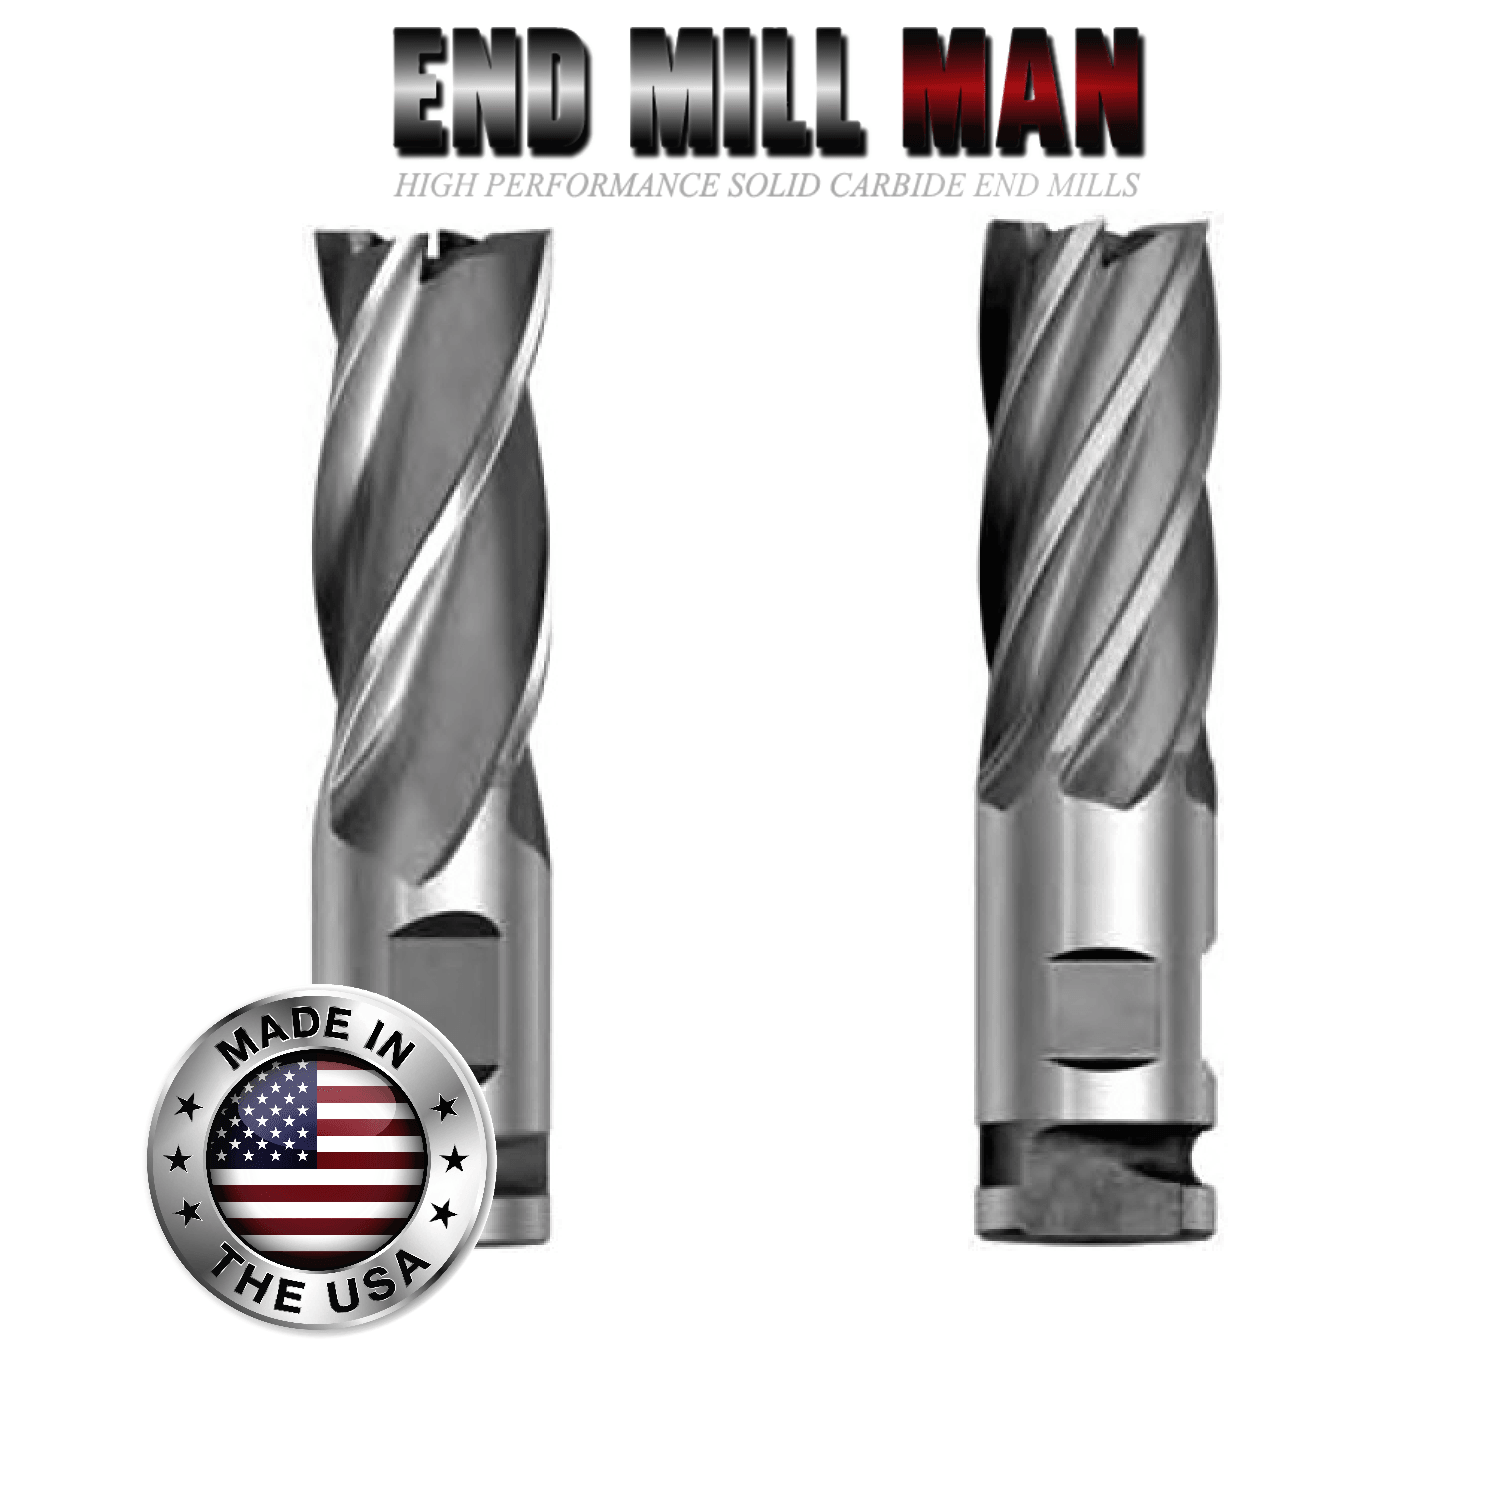 2-1/2" Dia. x 8" Cut Length Sure-Lock 4 or 6 Flute End Mill (2-1/2" Shank) - The End Mill Store 